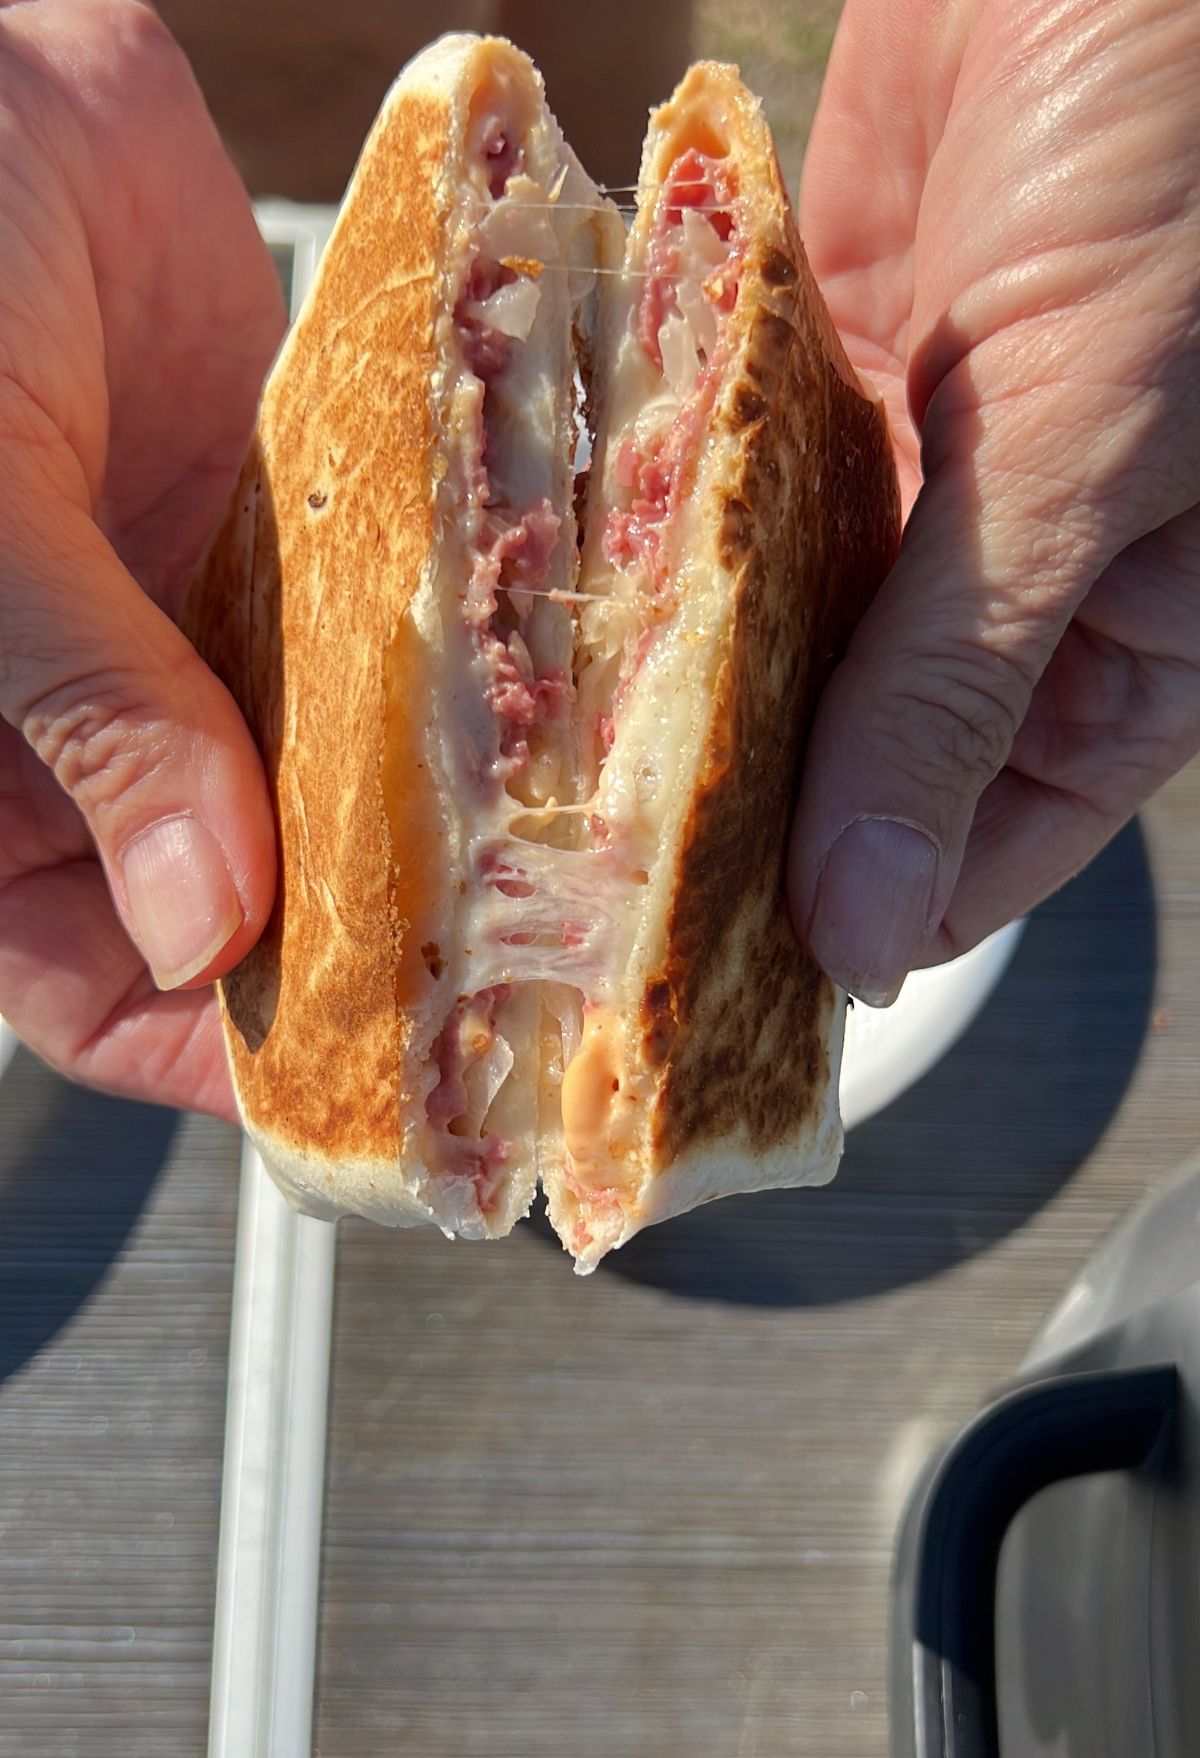 A person holding a toasted sandwich with melted cheese and meat filling.